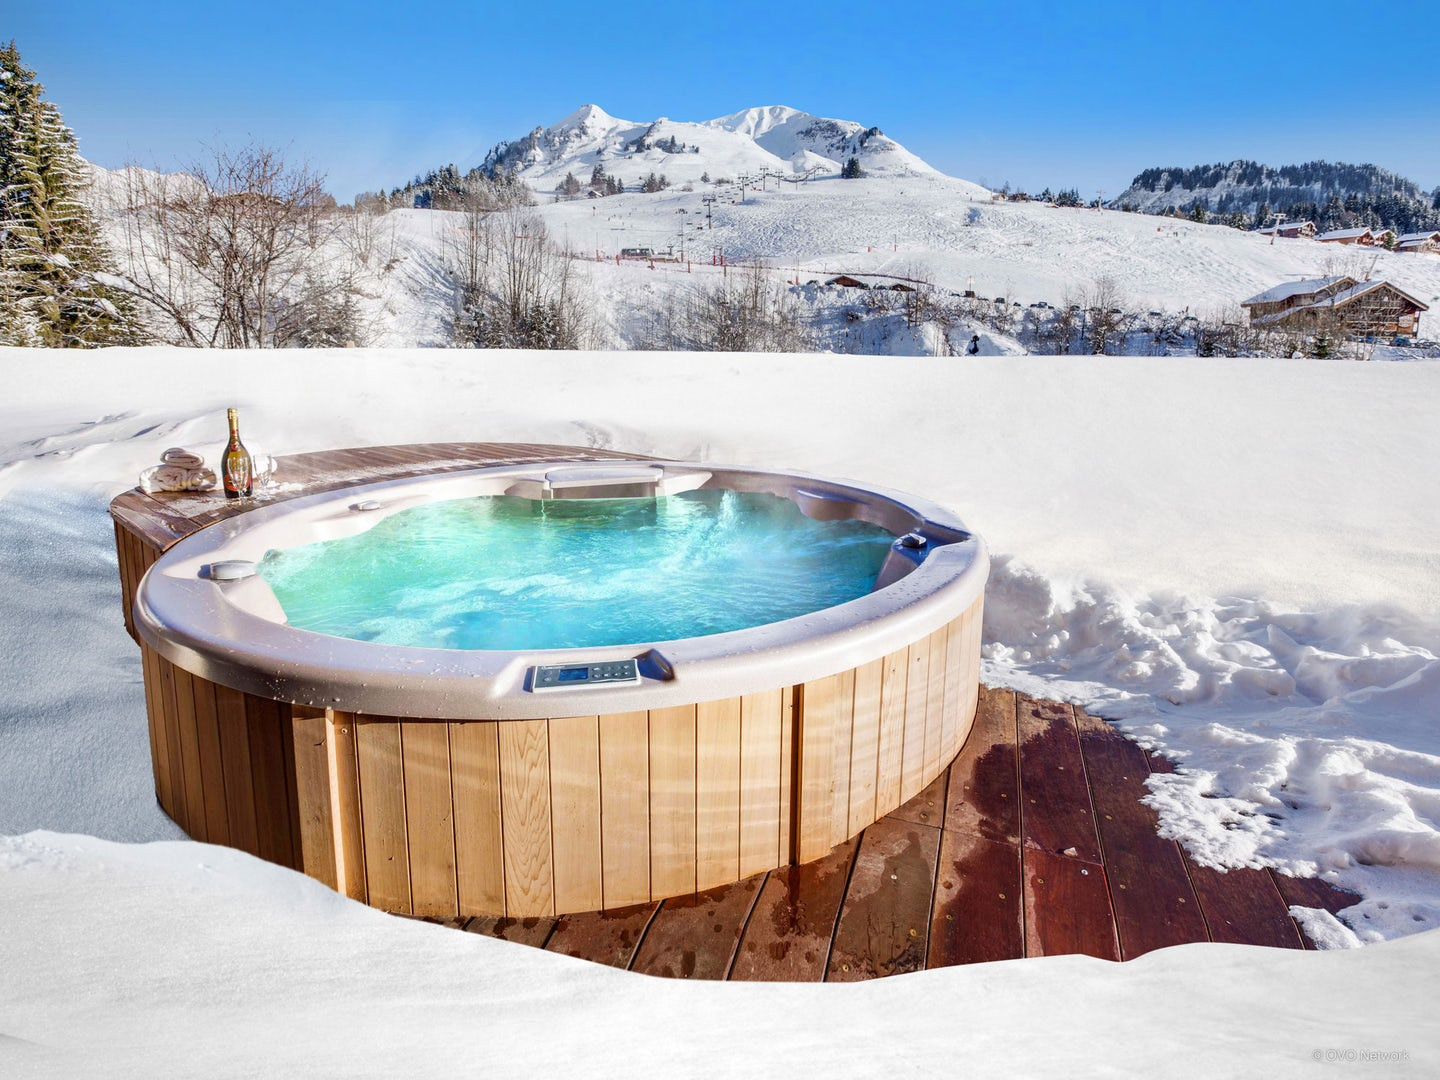 Le Grand Bornand Location Chalet Luxe Leumerin Jacuzzi 